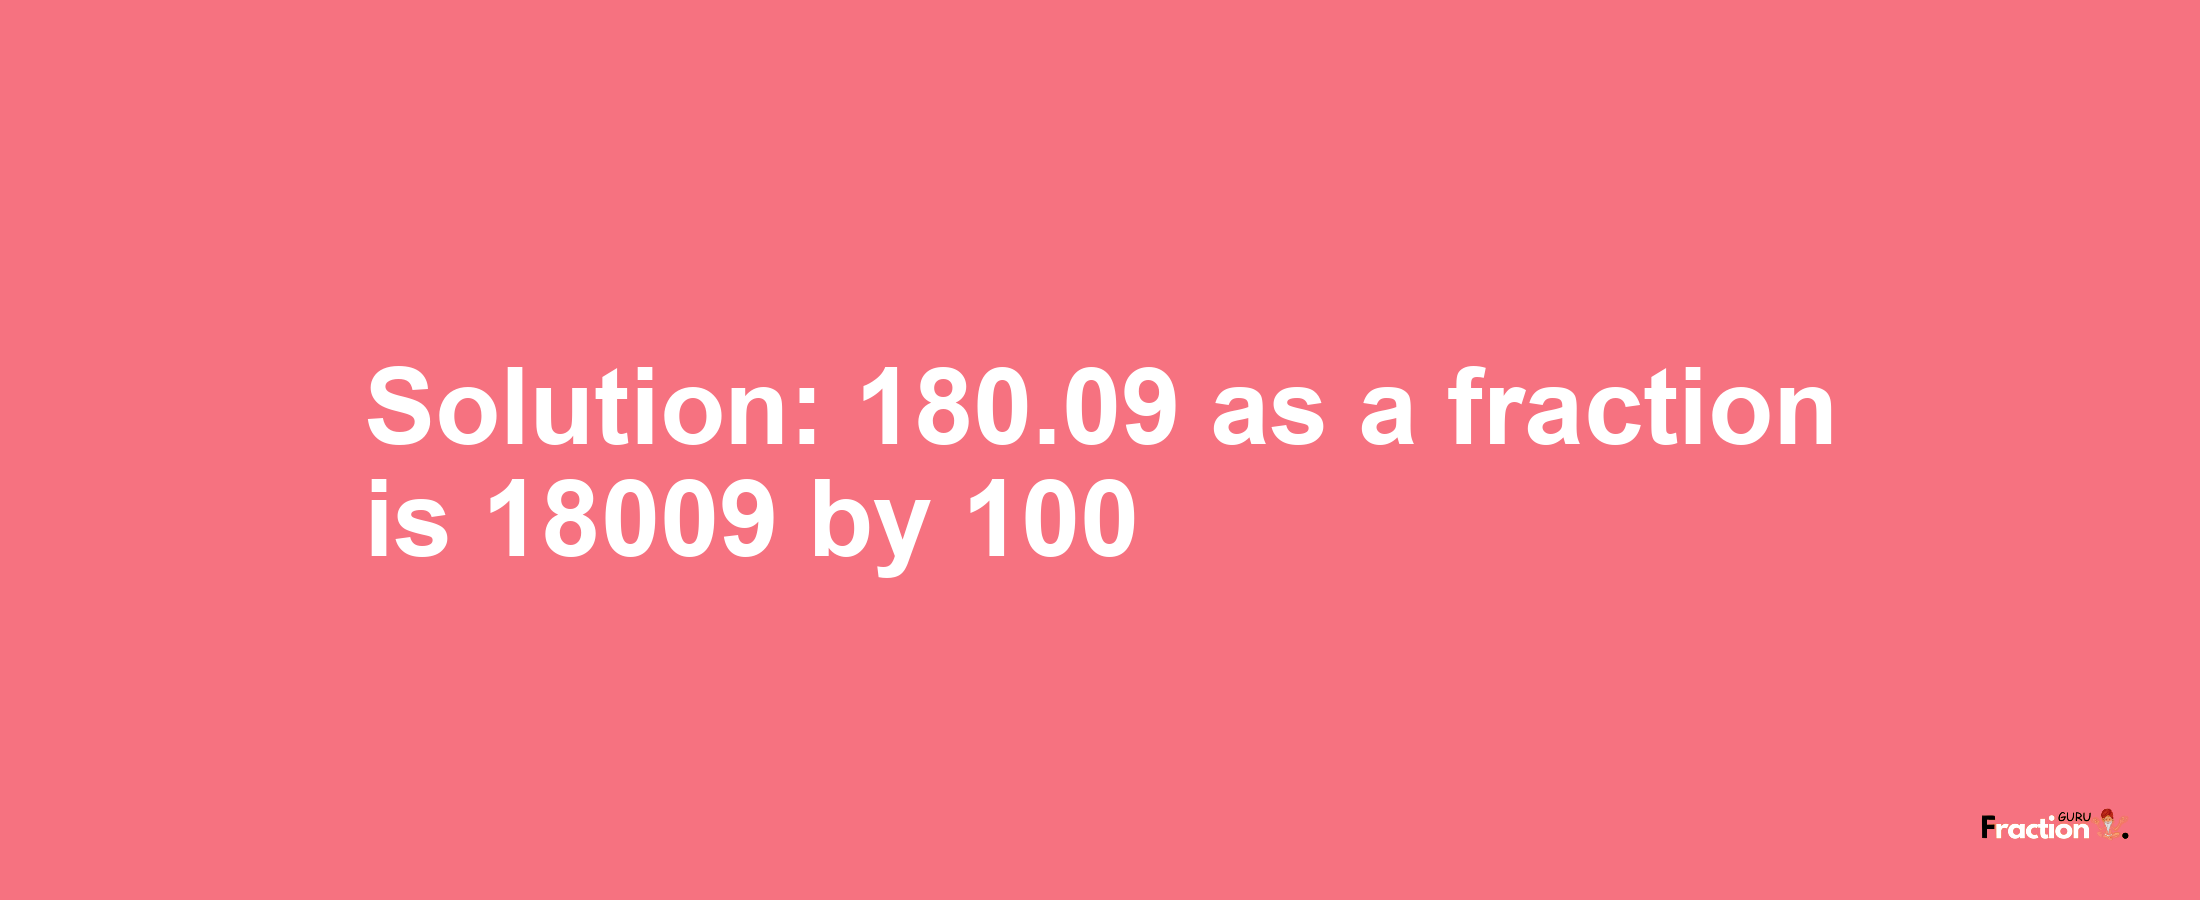 Solution:180.09 as a fraction is 18009/100